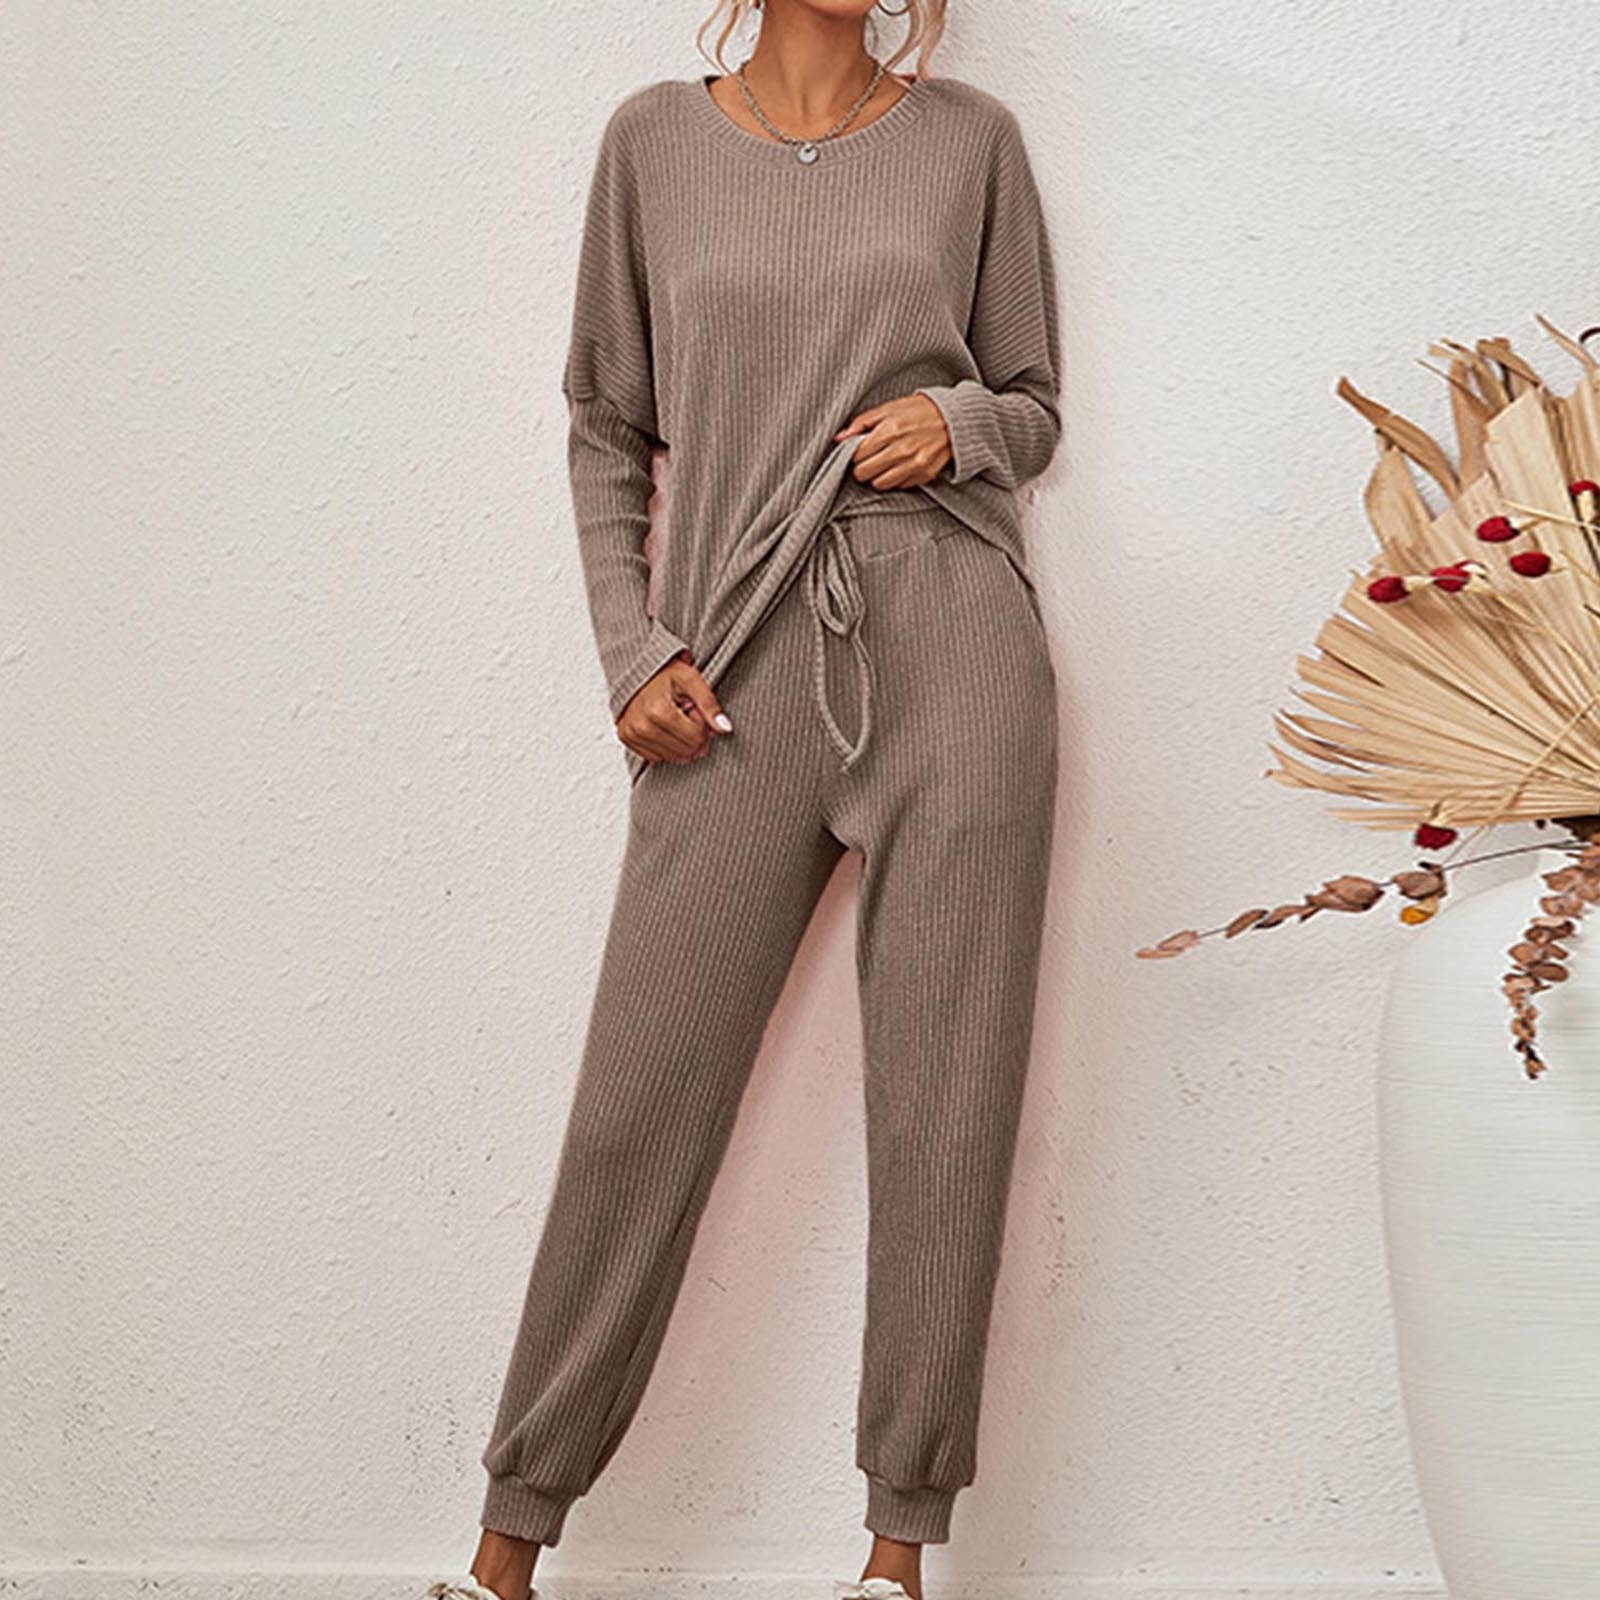 JNGSA Two Piece Outfits for Women Going Out,Women's Ribbed Lounge Sets ...